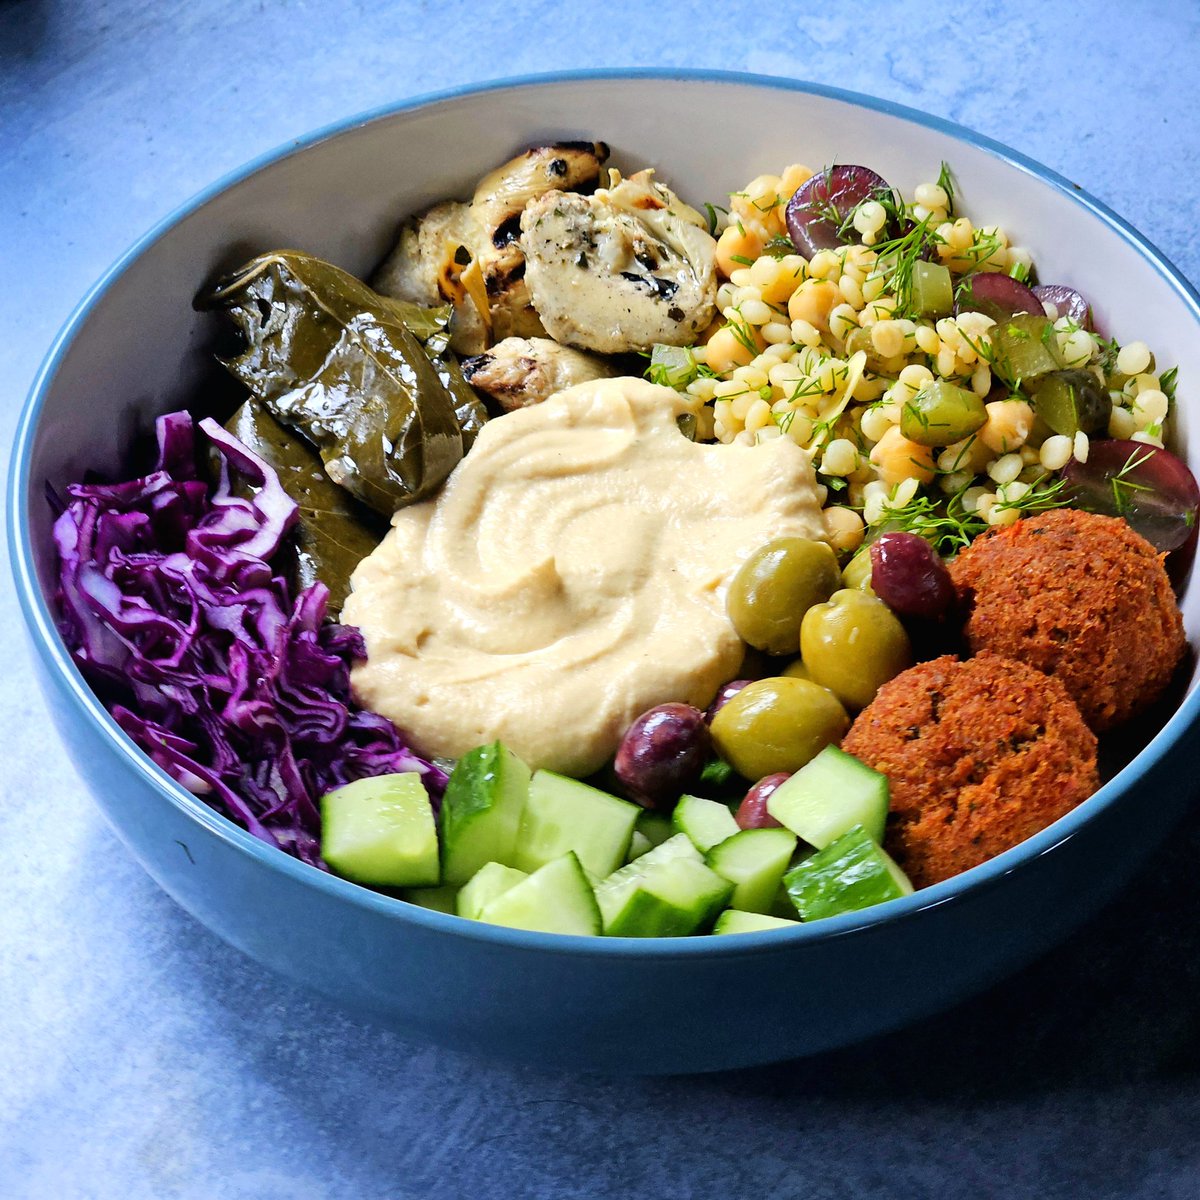 What I ate today!

Bliss bowl with hummus, falafel, stuffed vine leaves, artichokes, olives, grape/caper couscous, and salad.

#vegan #plantbased